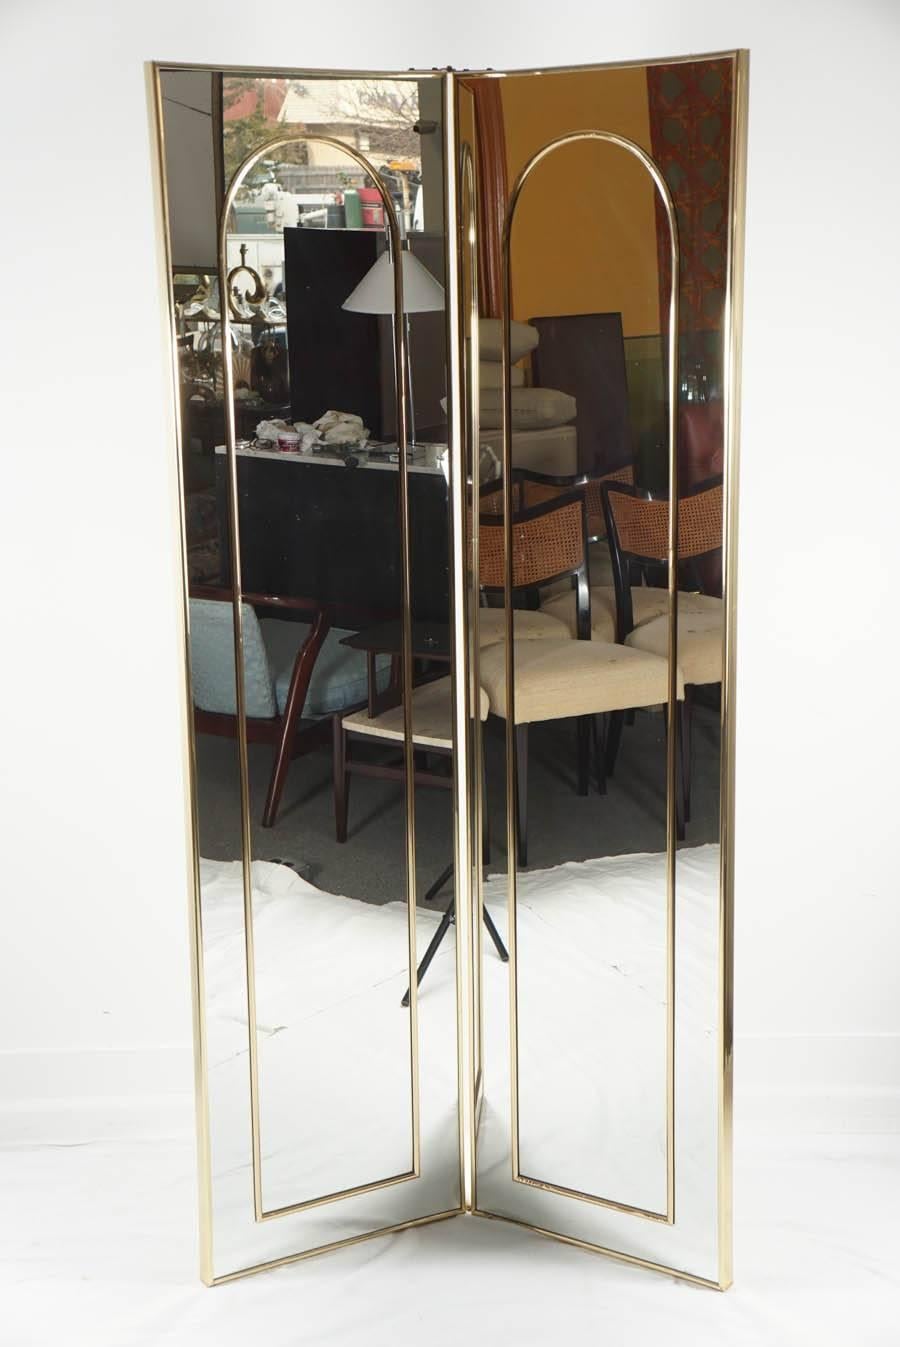 A great two-panel floor mirror. The mirror is double sided, with a brass detail inset on one side, and nothing on back. Mirror is in great condition, with slight wear from age.